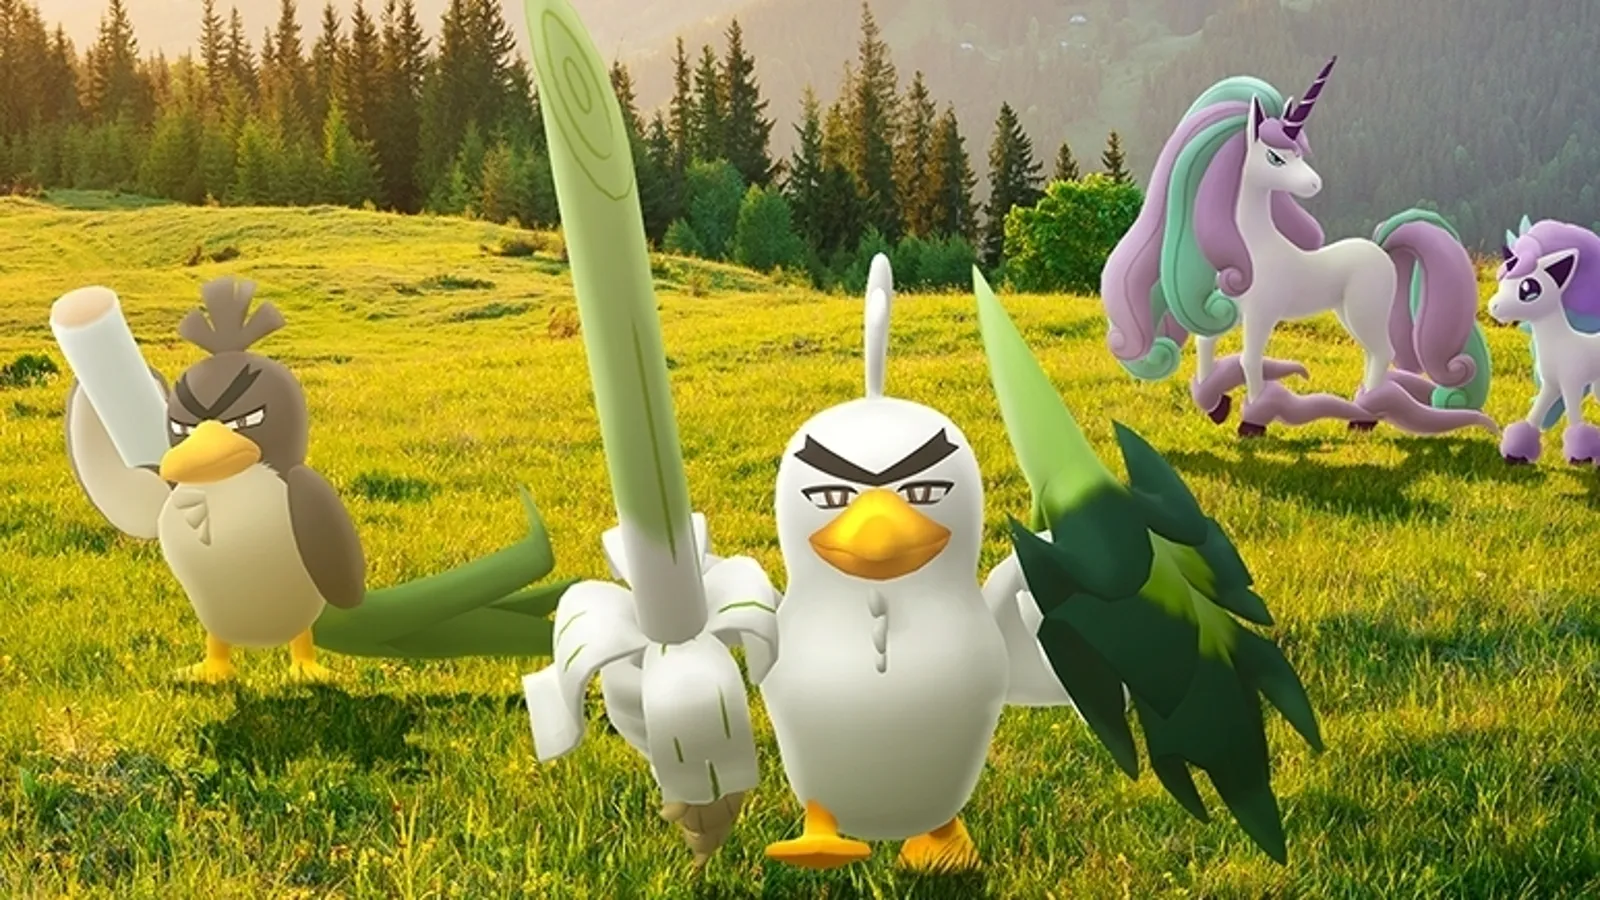 How to Get Galarian Farfetch'd in Pokemon GO and Can It be Shiny